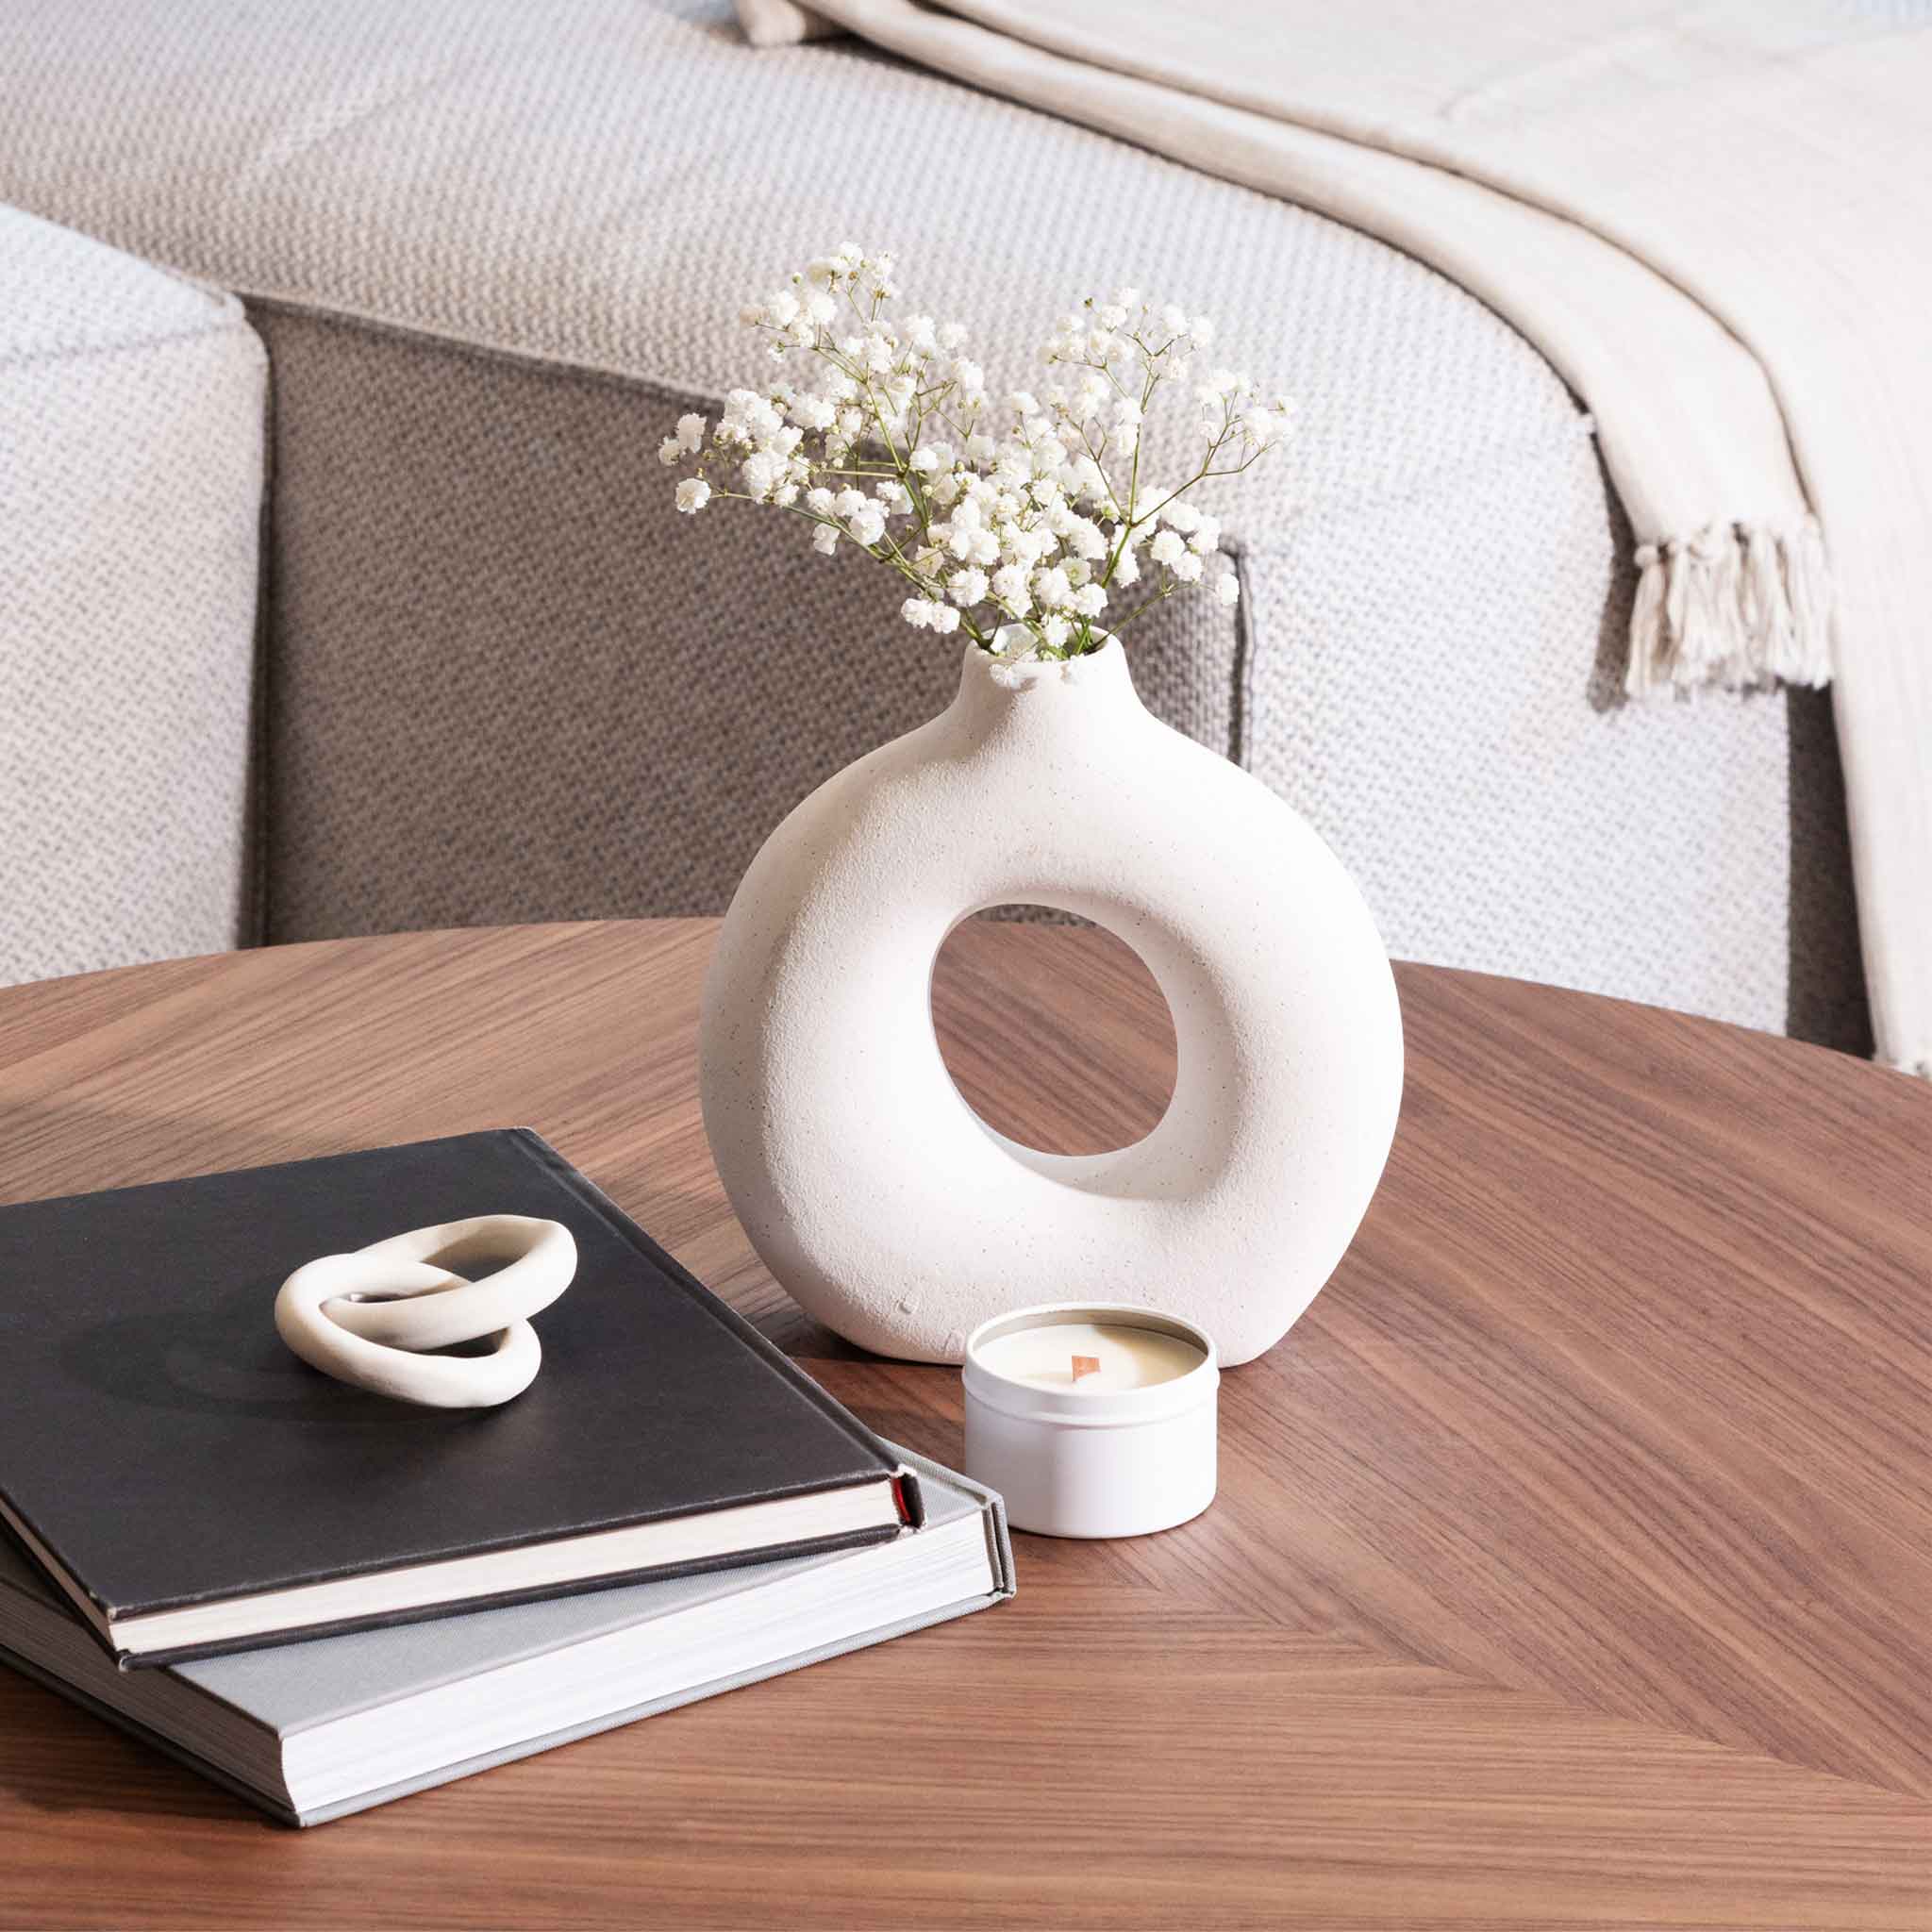 Talia Wooden Round Coffee Table - Coffee Table